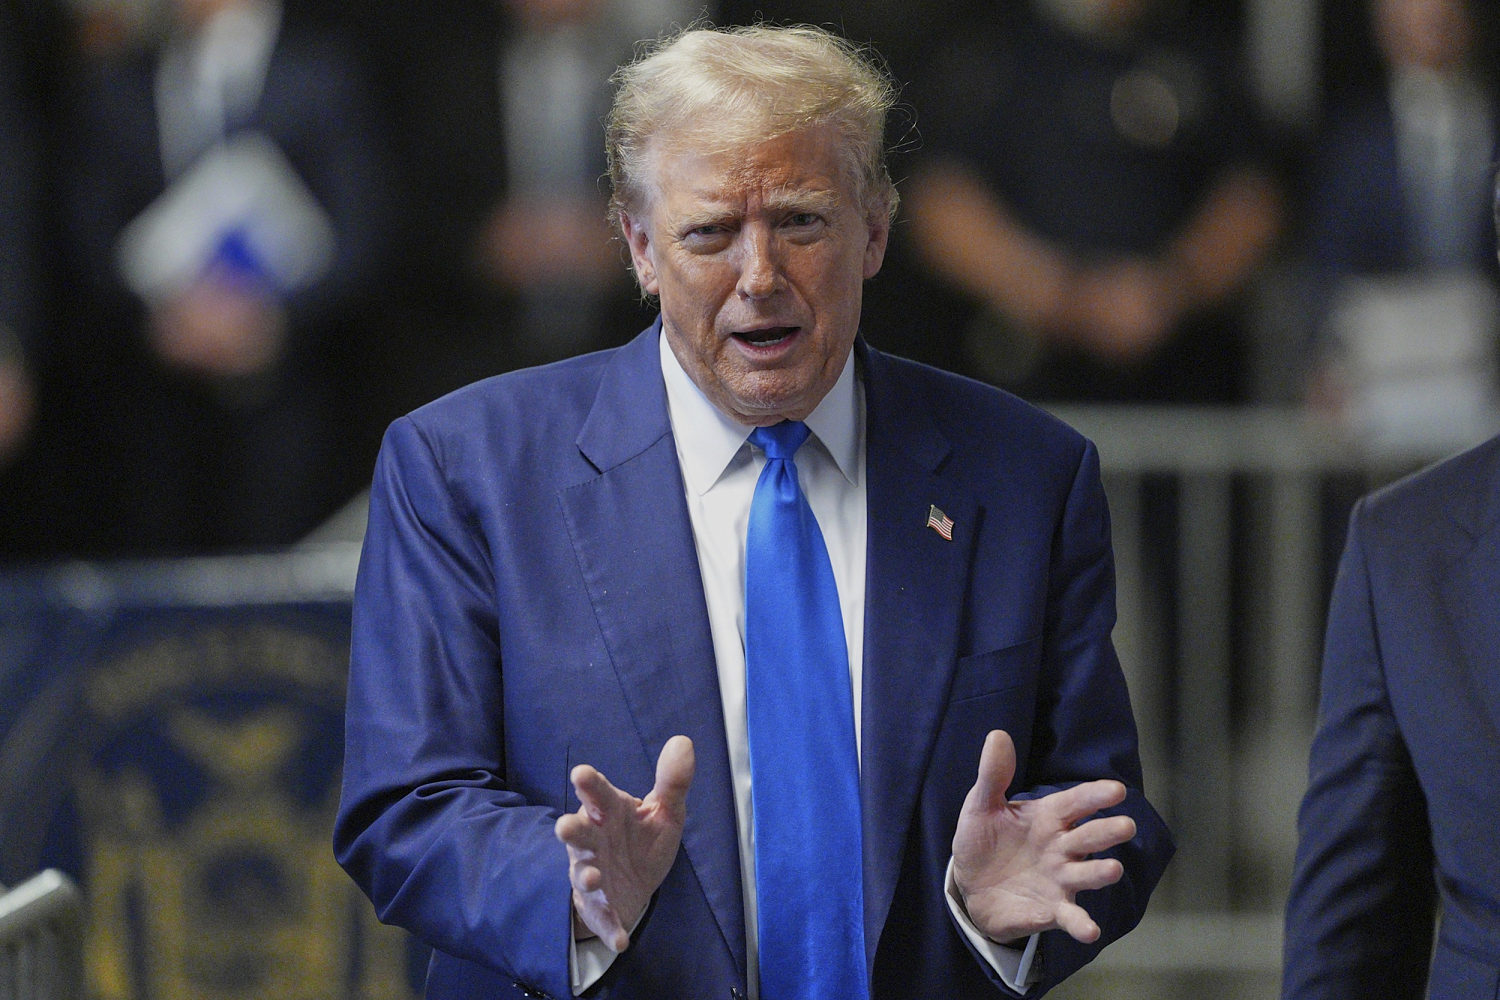 At a private donor event, Trump likens the Biden administration to the 'Gestapo'